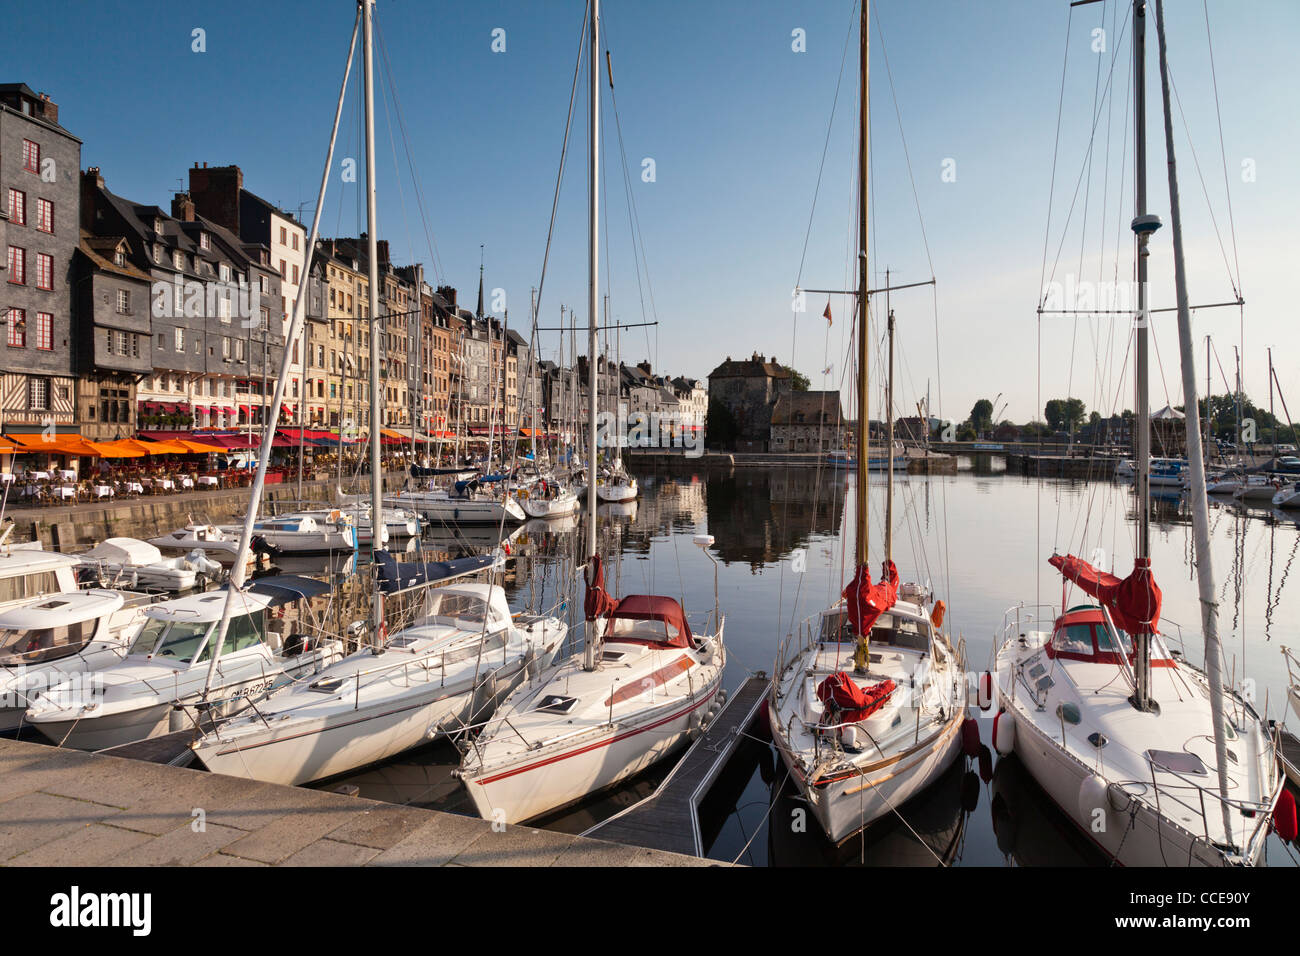 Sailing and power boats line the old harbour basin of Honfleur in Normandy, France. Stock Photo